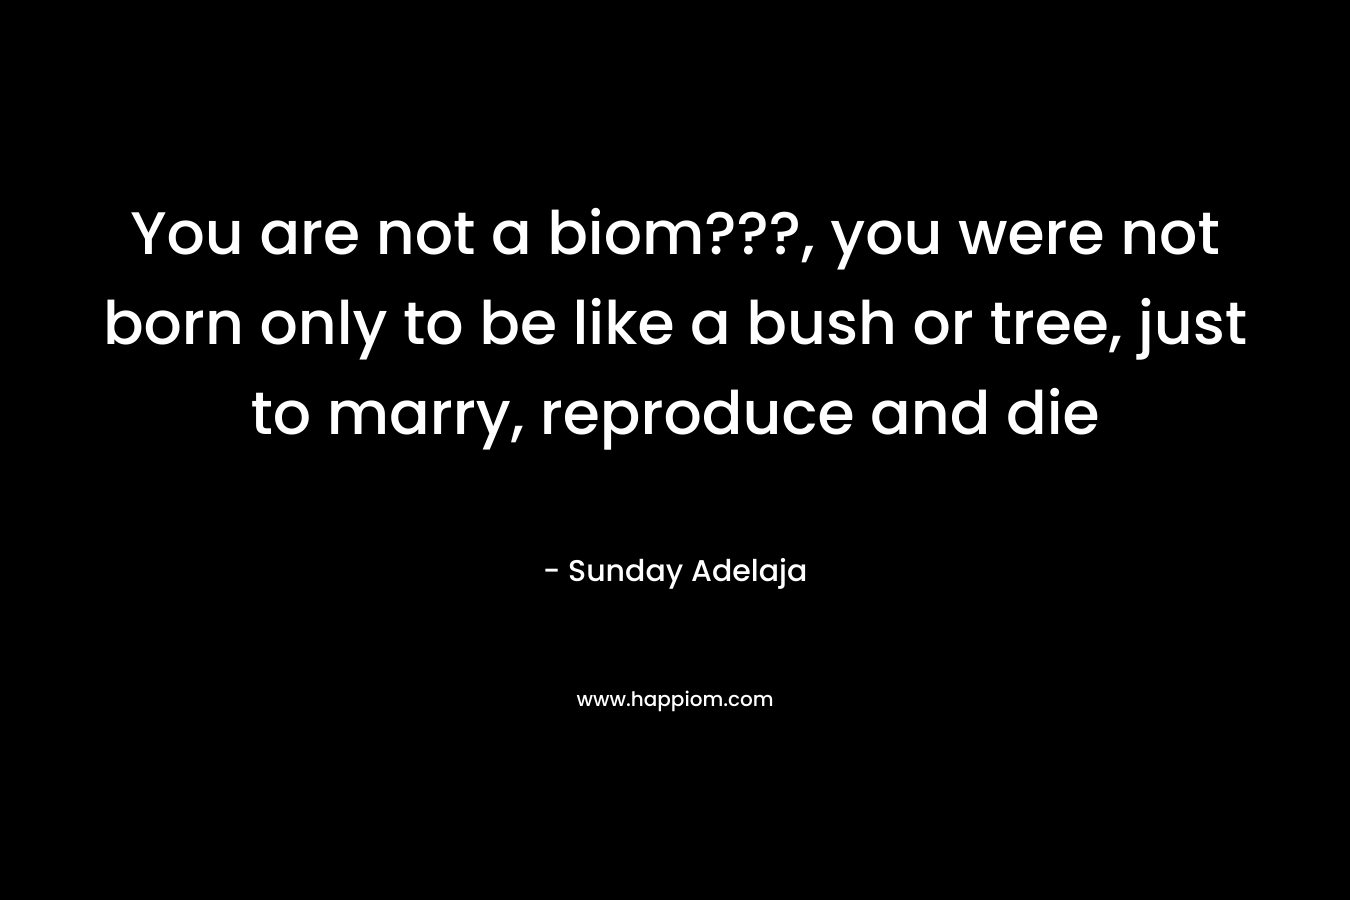 You are not a biom???, you were not born only to be like a bush or tree, just to marry, reproduce and die – Sunday Adelaja